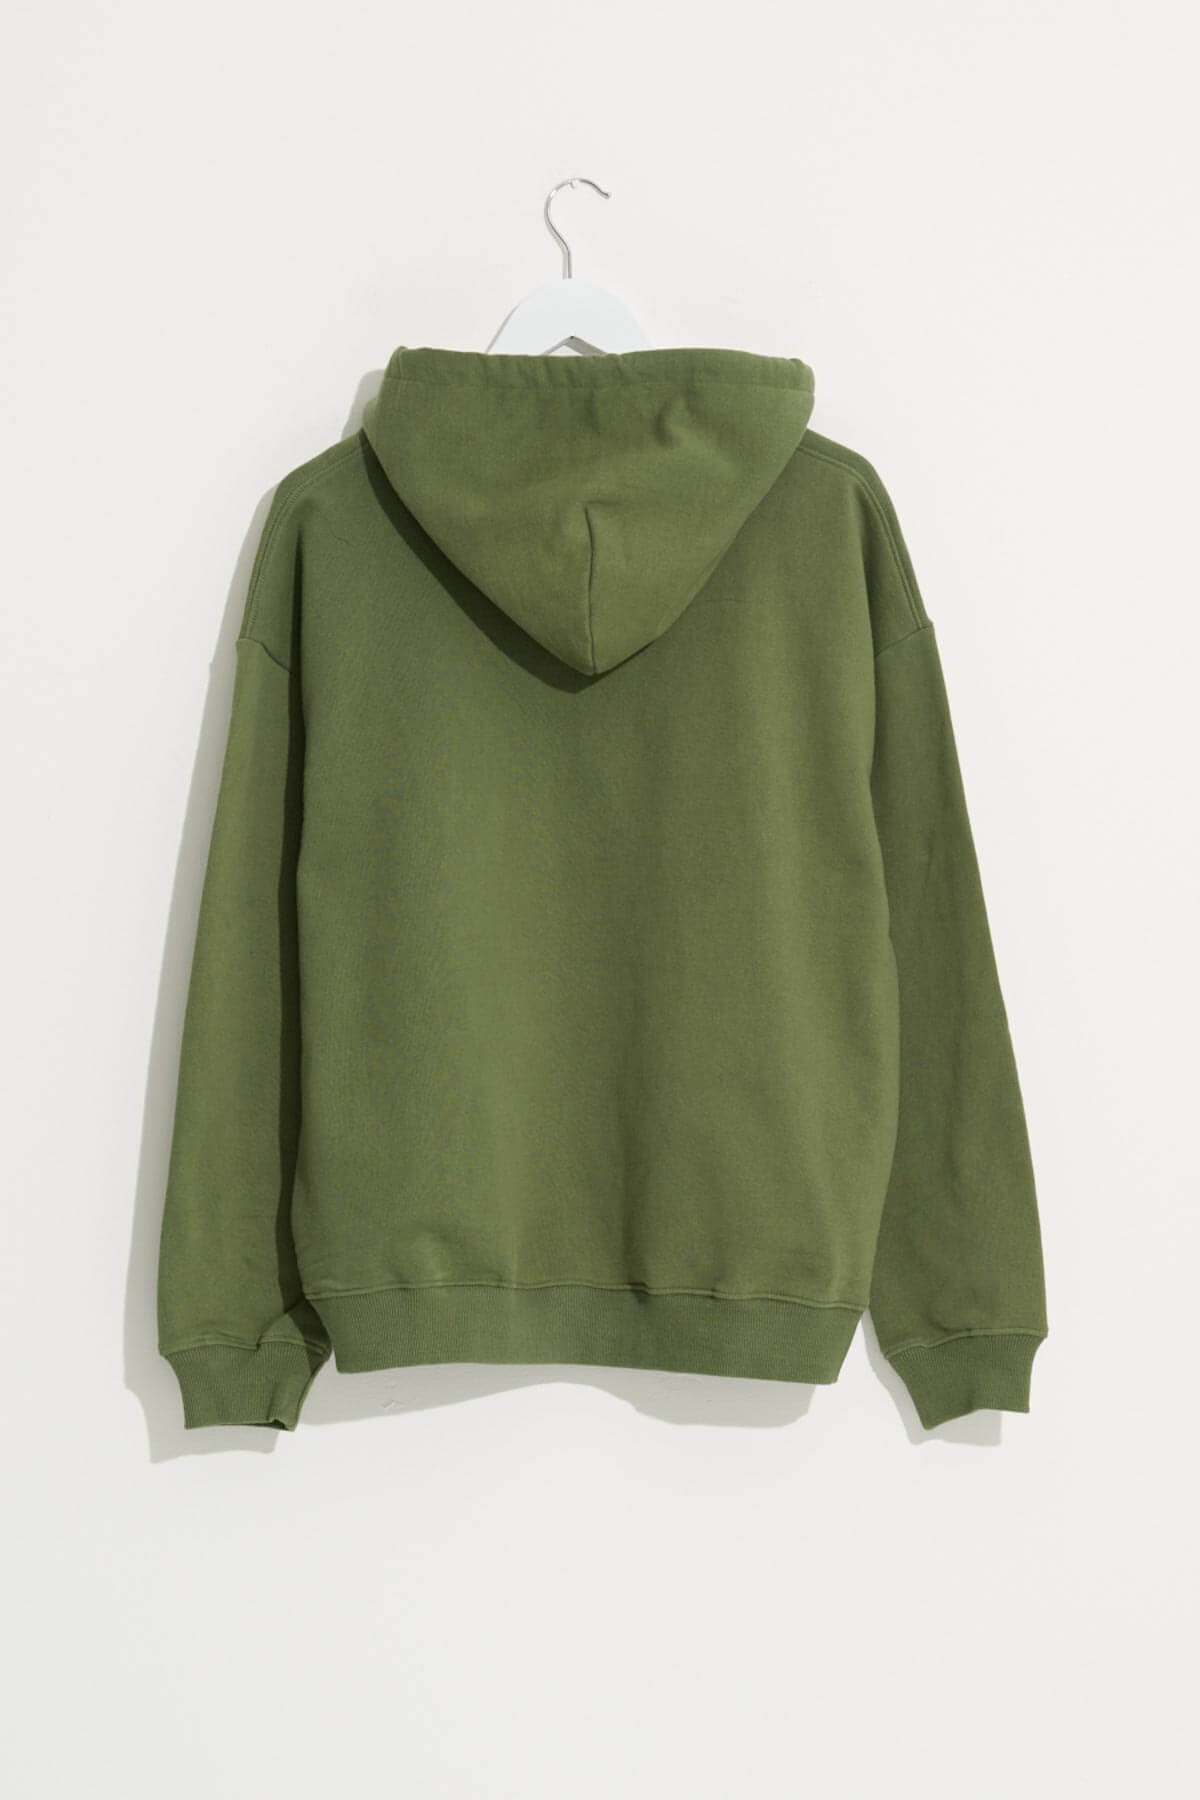 Misfit Shapes - Dream Less OS Hood - Army Green